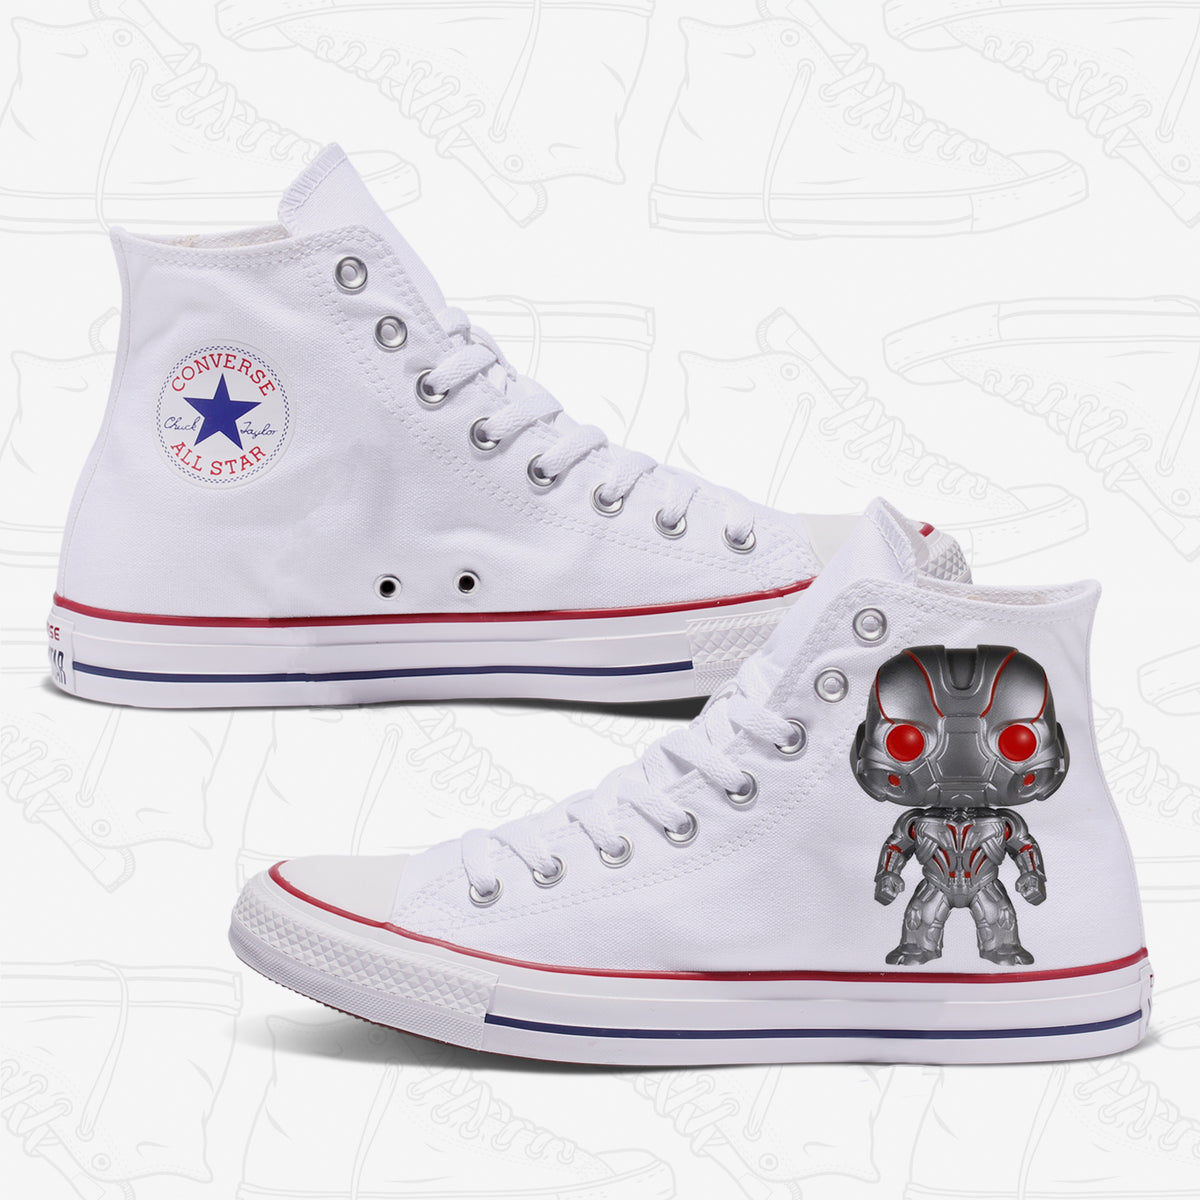 Ultron Adult Converse Shoes